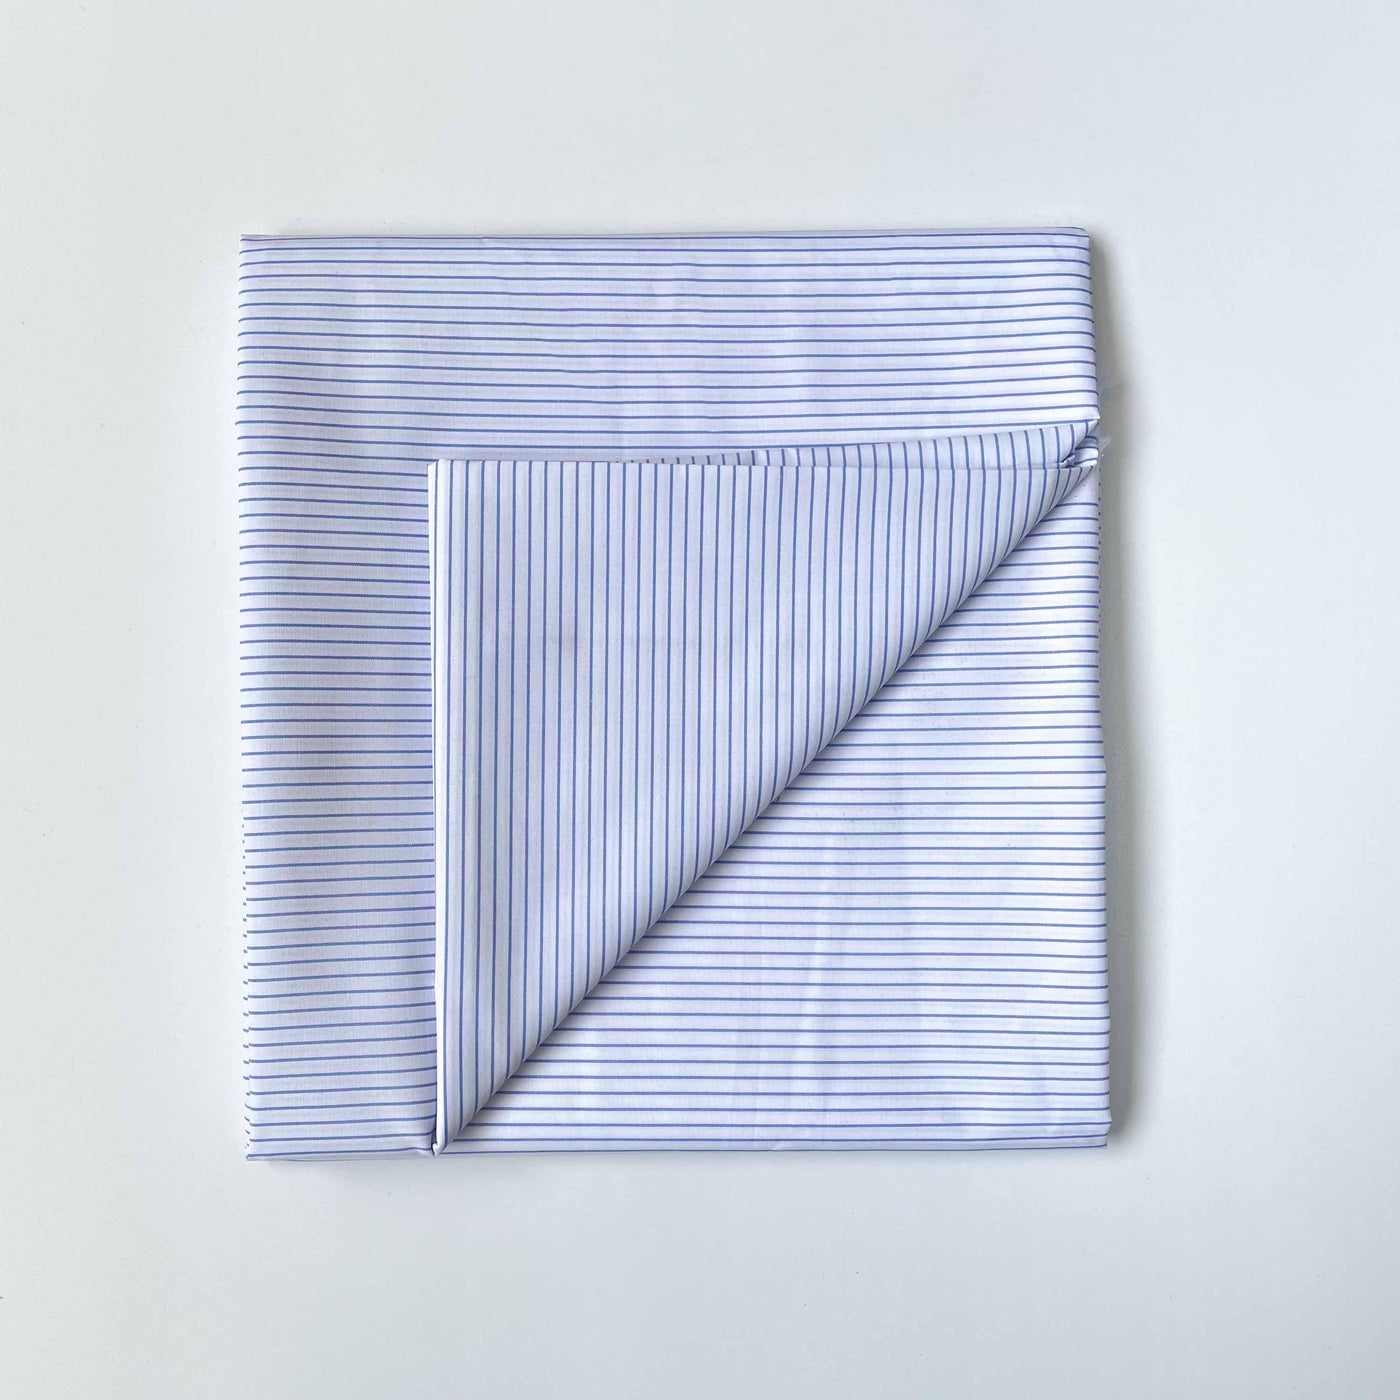 Fabric Pandit Fabric Men's White & Light Blue Stripes Pattern Pure Cotton Shirting Fabric (Width 58 Inches)